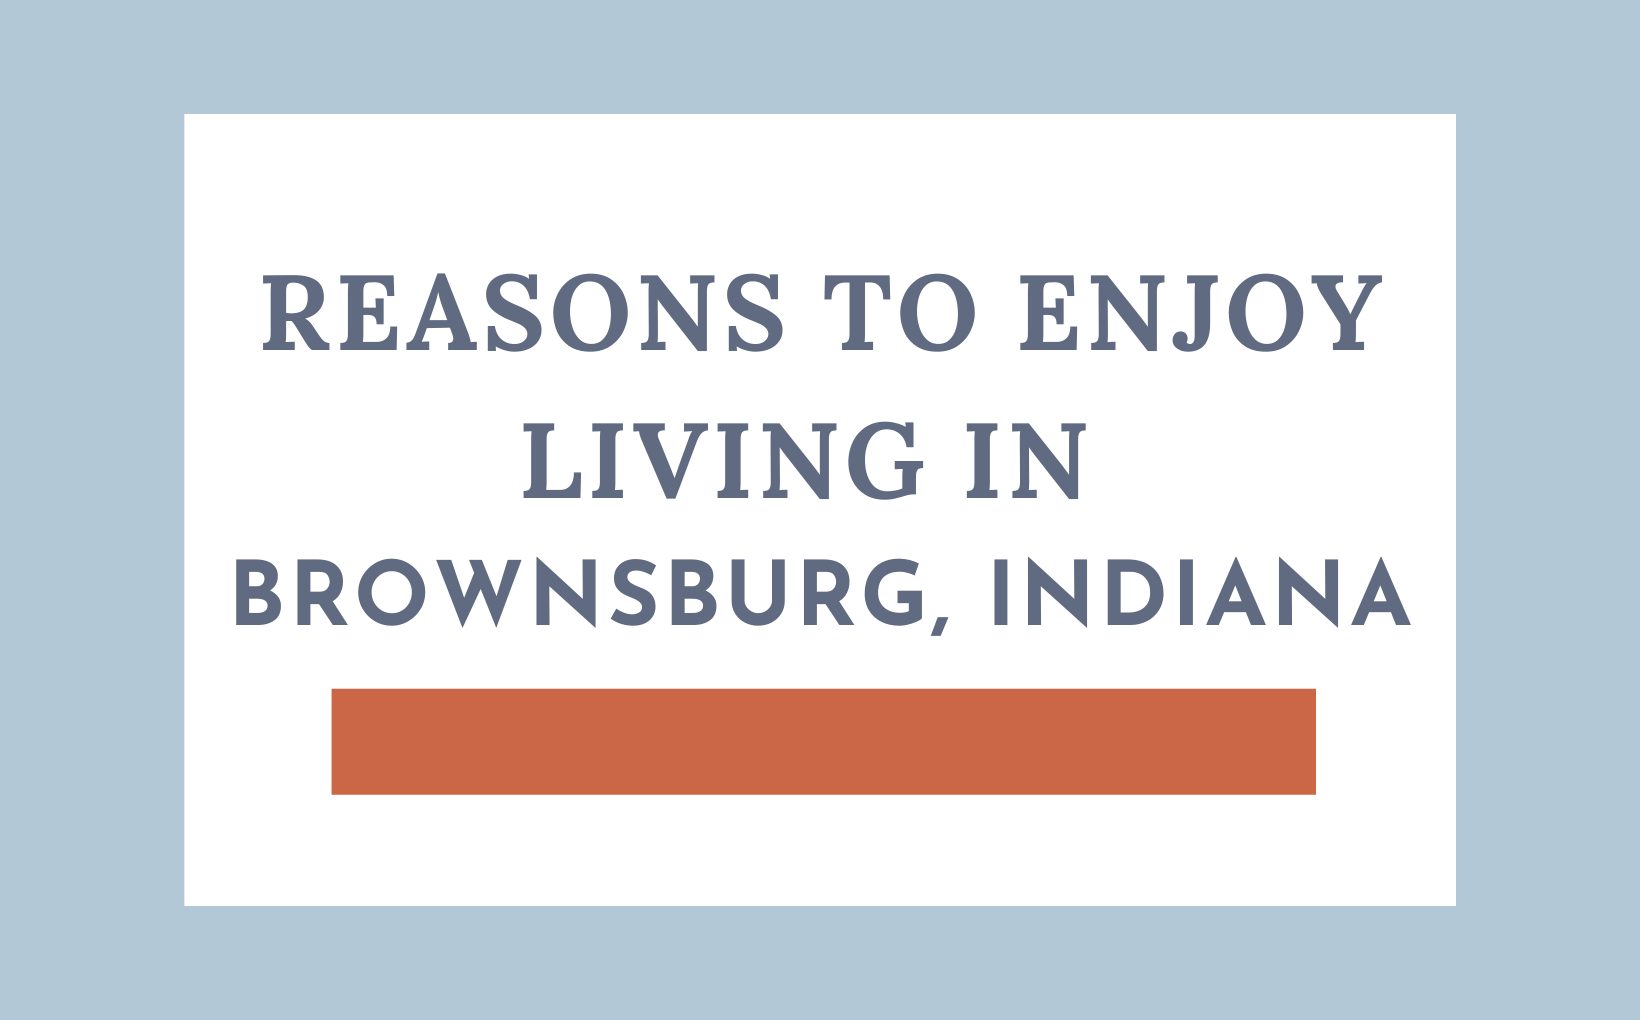 Living in Indy feature image